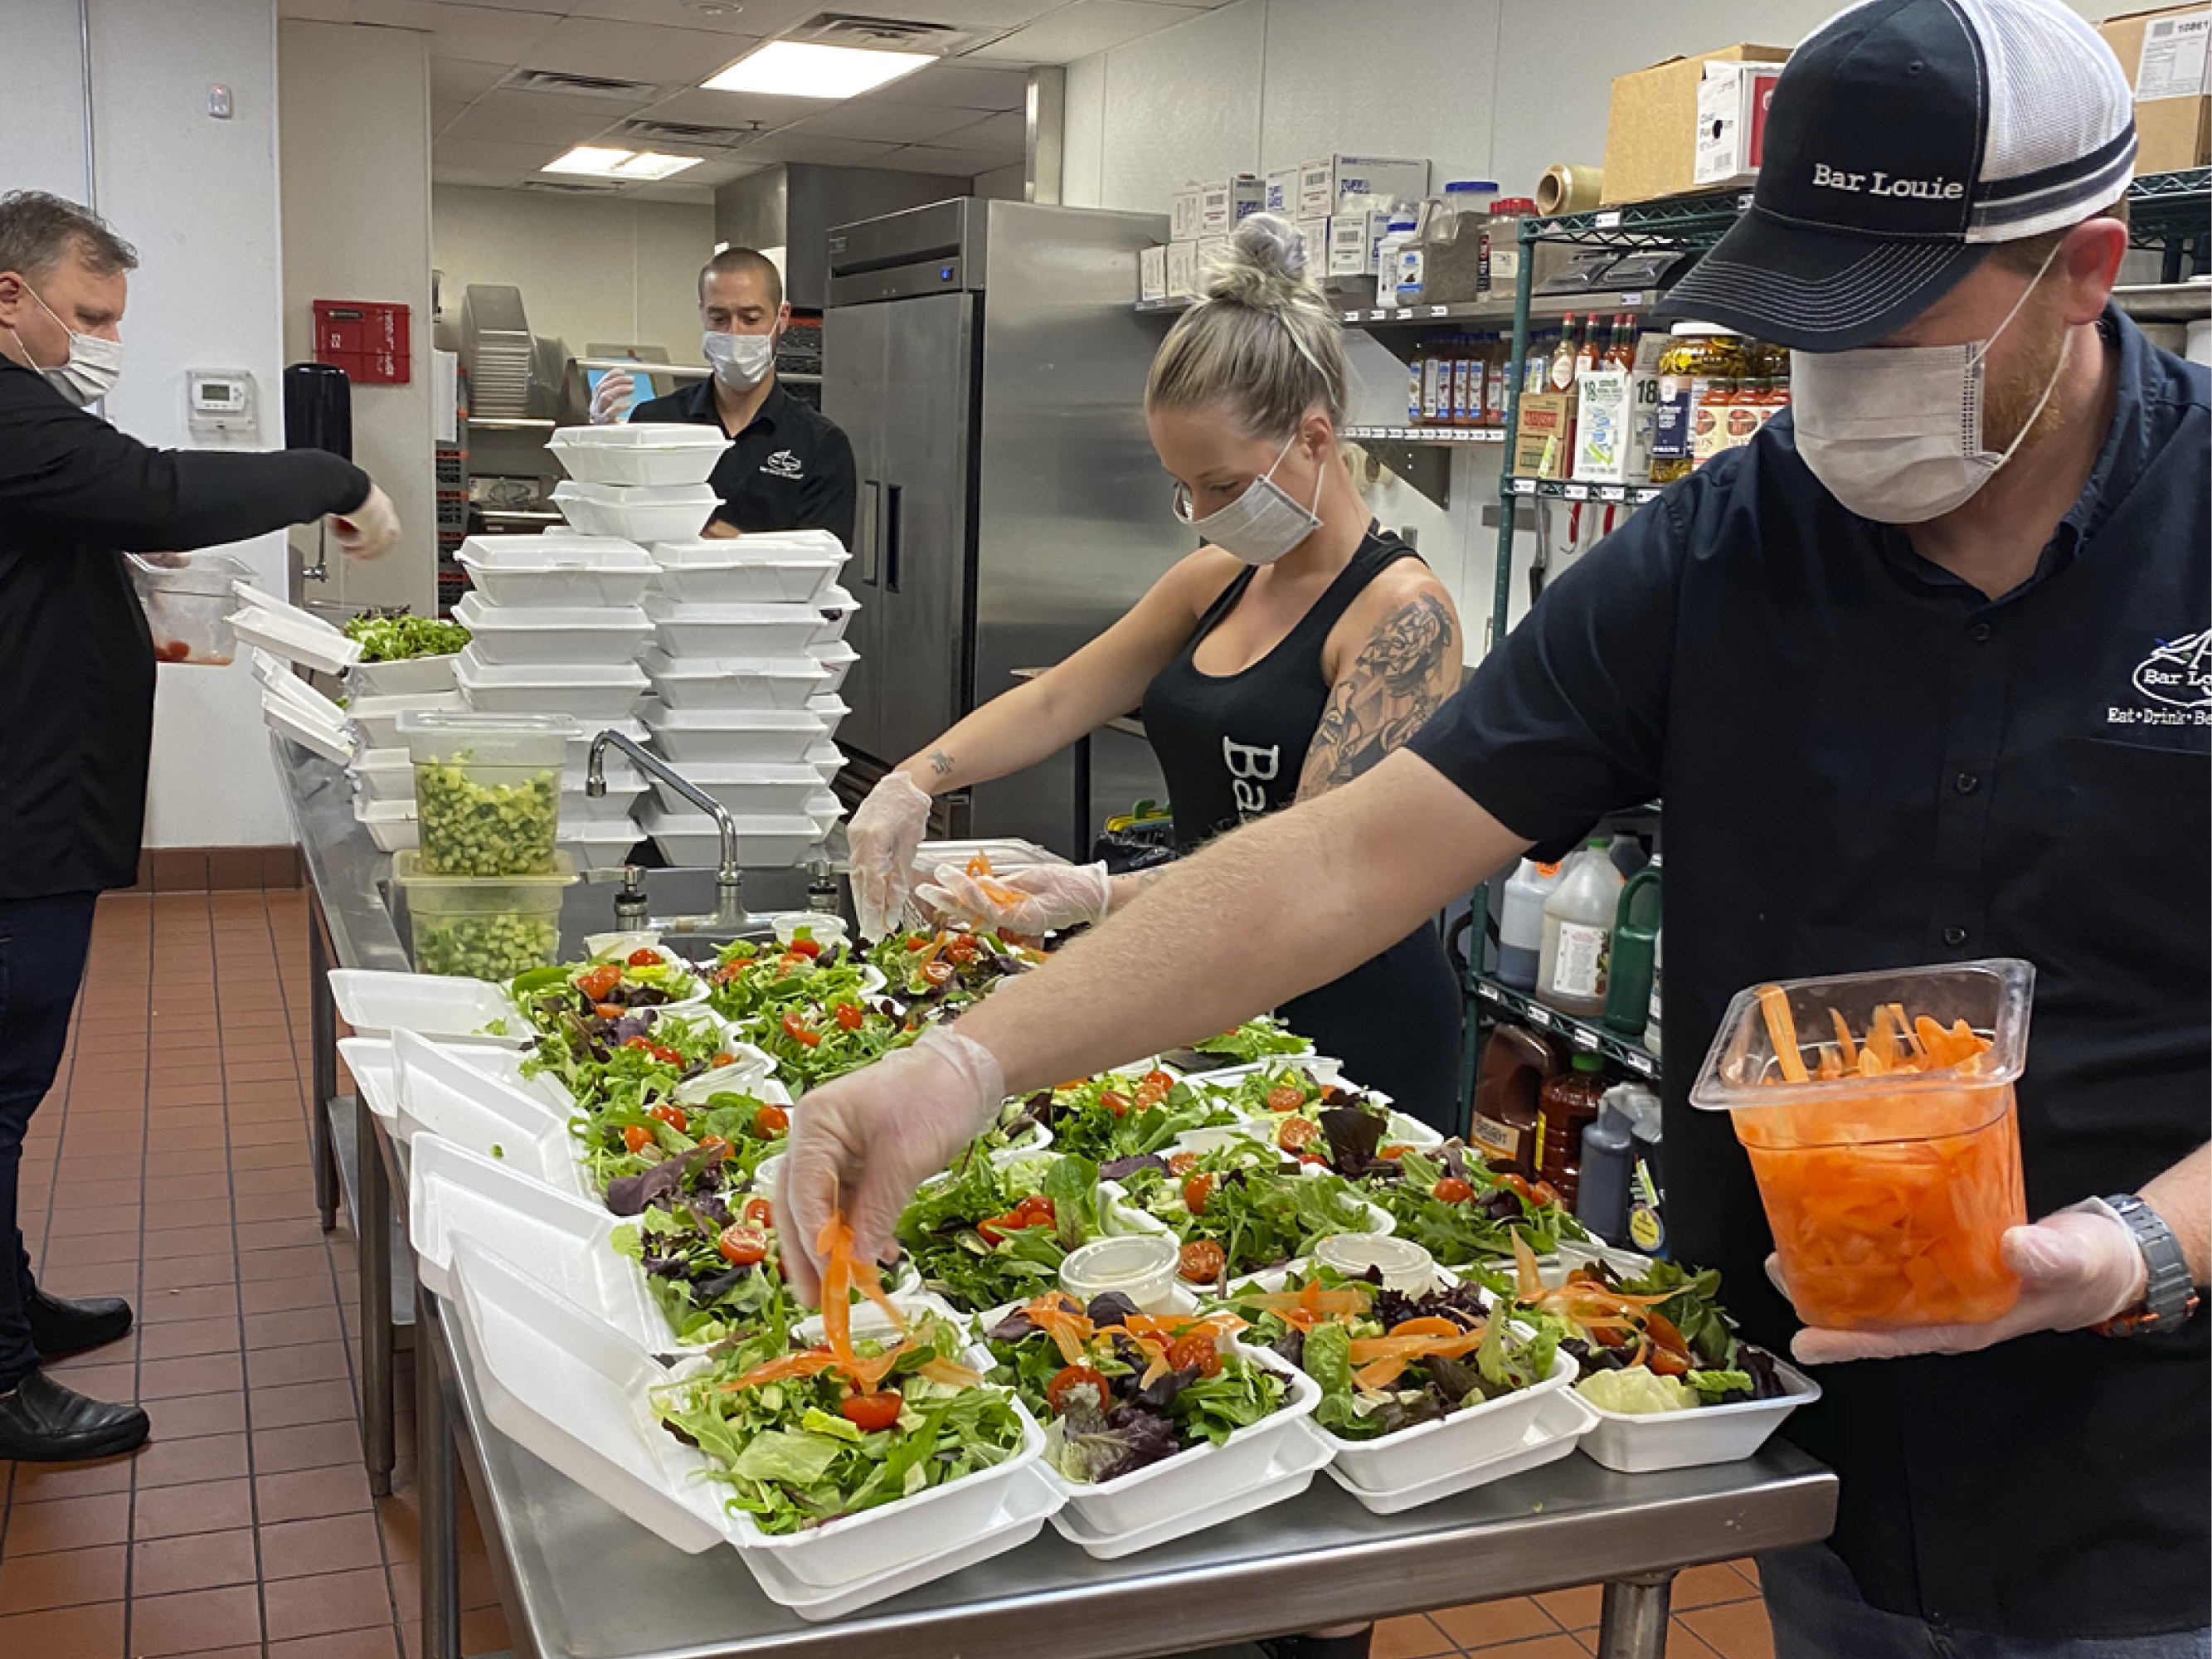 Bar Louie team members preparing meals to deliver to local front-line workers in the midst of COVID-19.